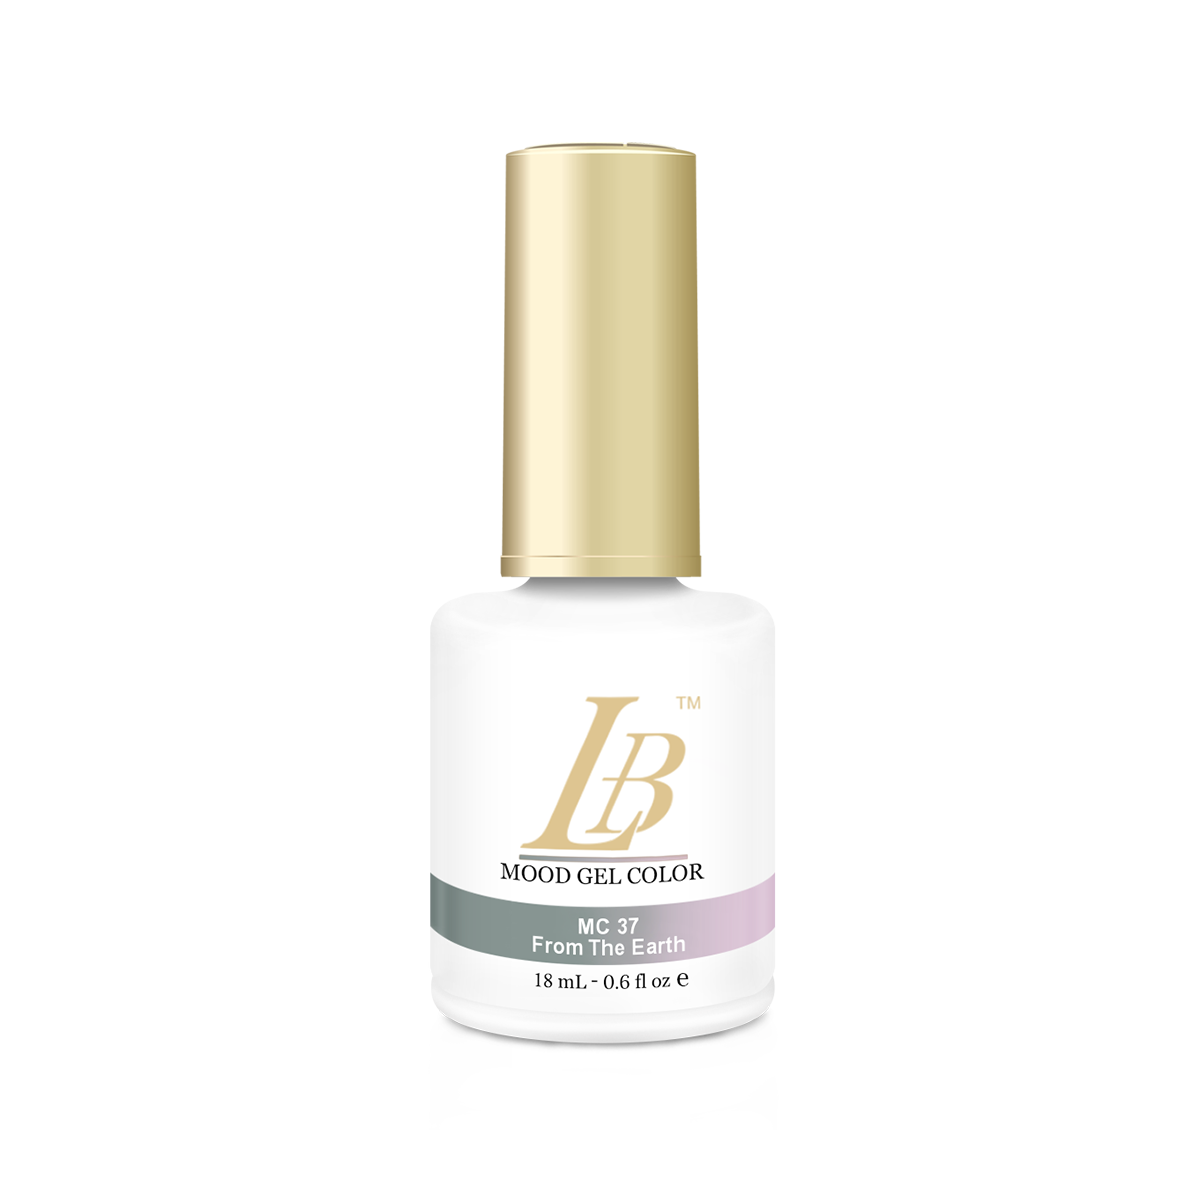 LB Mood Gel Color - MC37 From The Earth